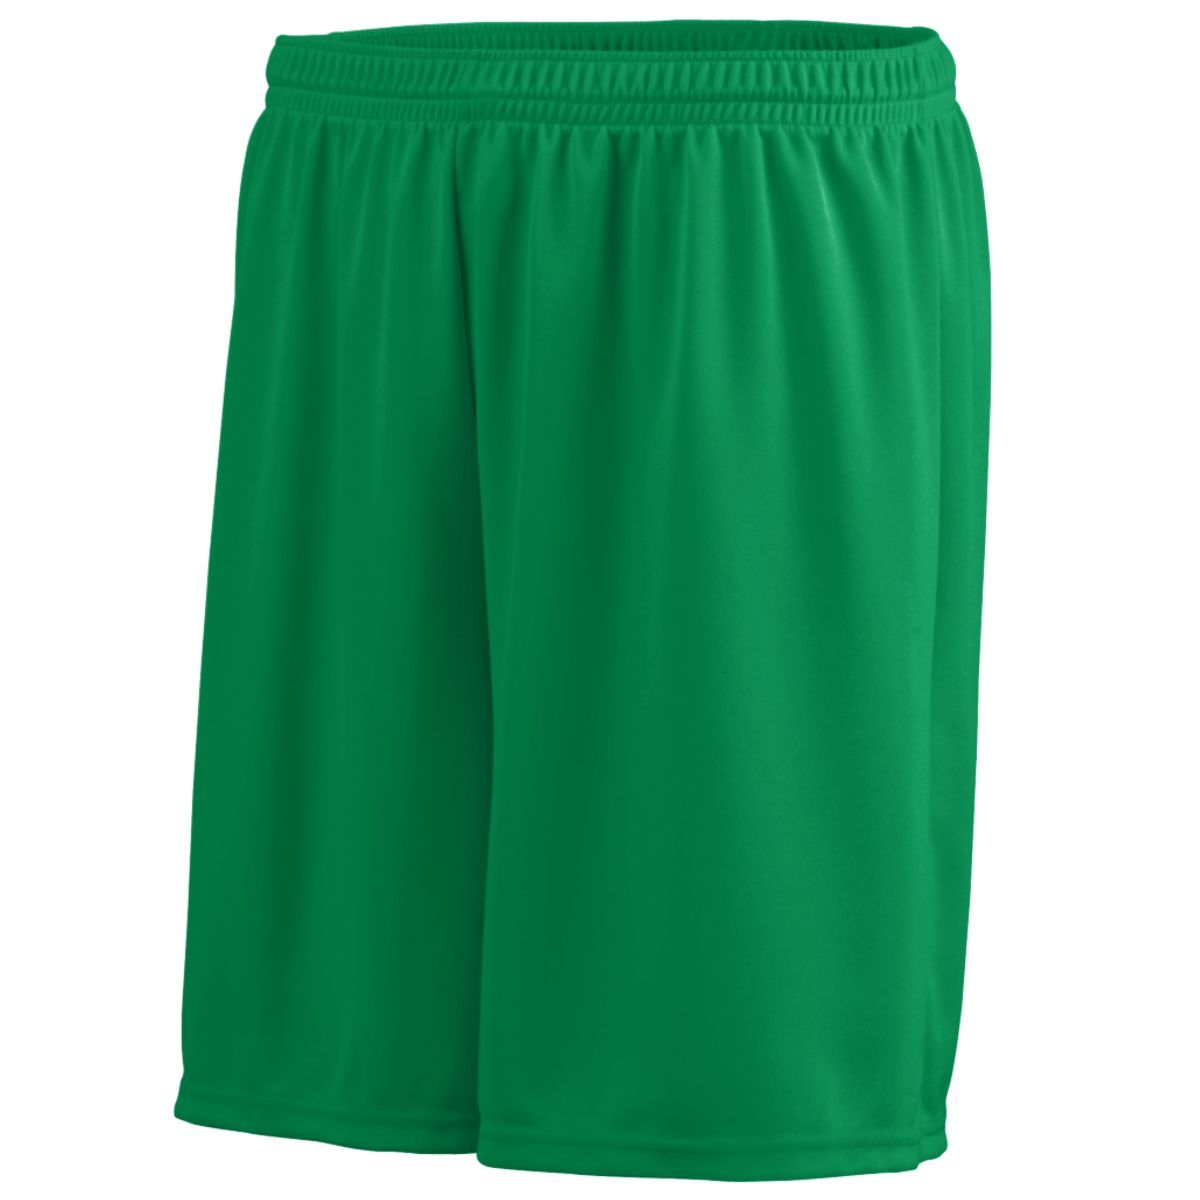 Augusta Sportswear Octane Shorts in Kelly  -Part of the Adult, Adult-Shorts, Augusta-Products product lines at KanaleyCreations.com